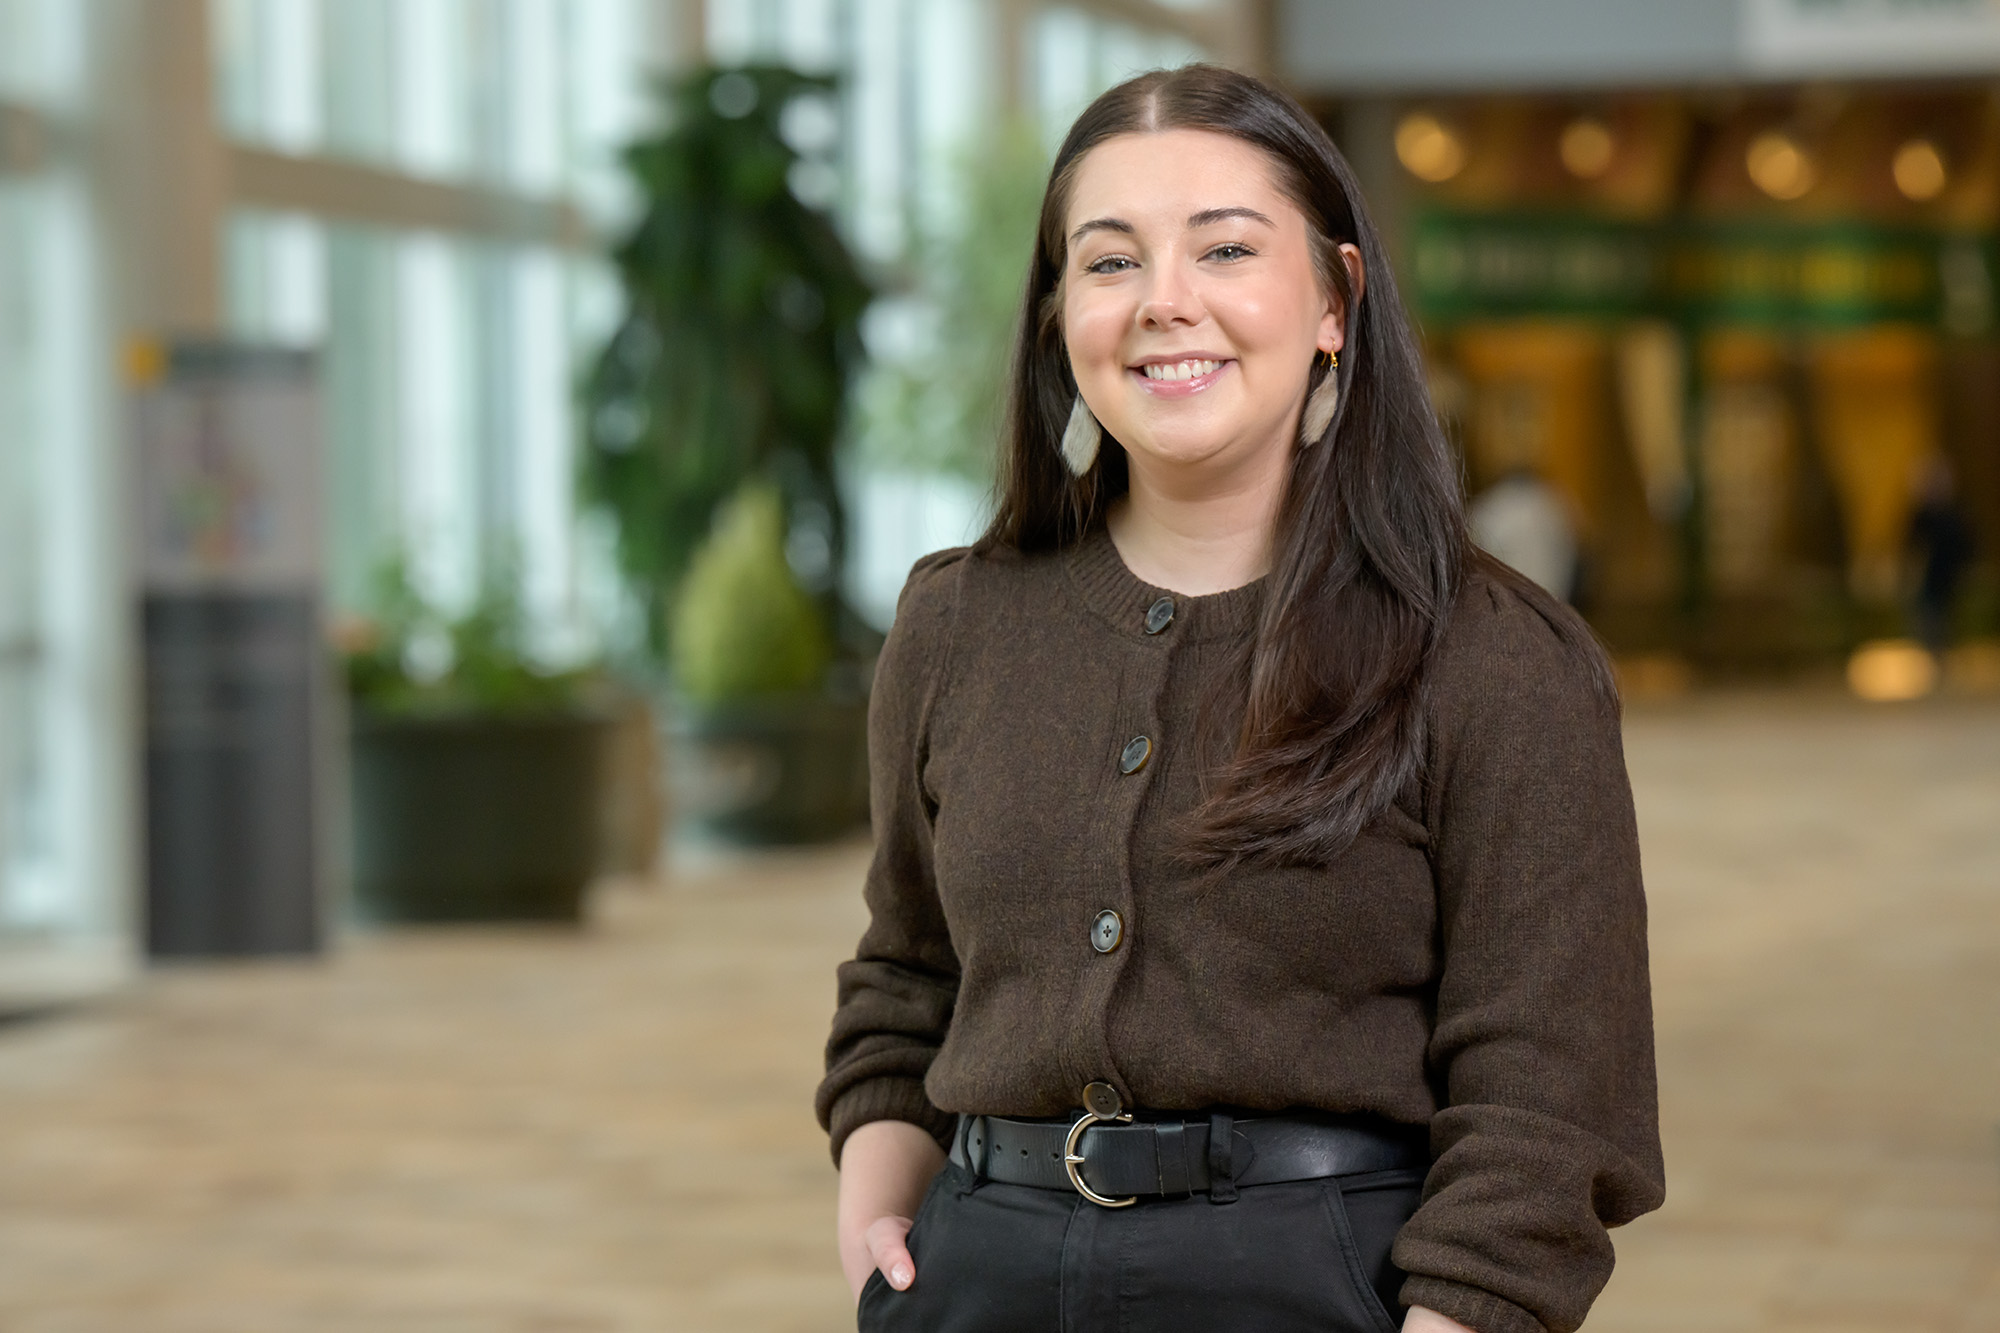 Emily Winters’ research is focused on cannabis in long-term care homes. (Photo by Trevor Hopkin)

